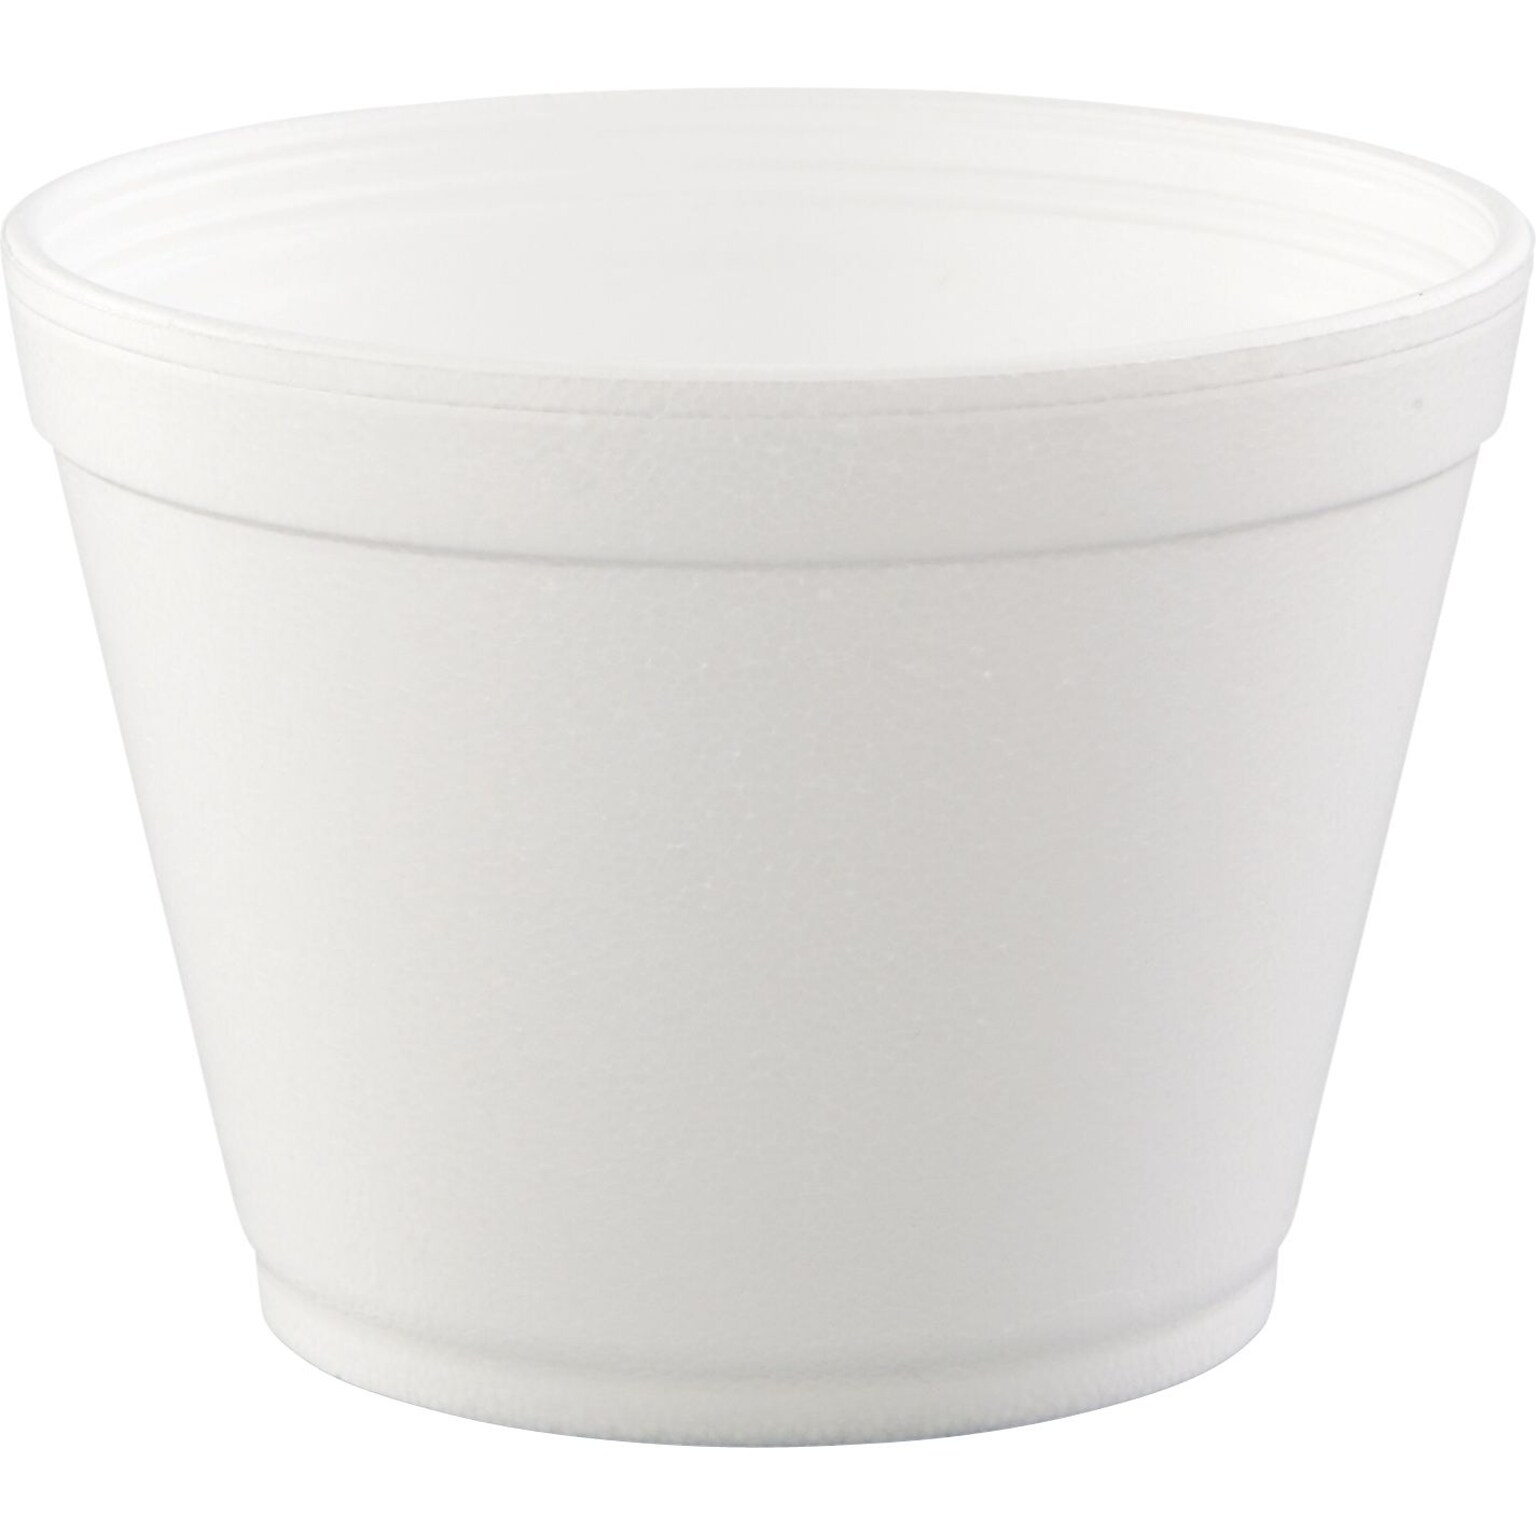 Dart® J cup® Round Insulated Foam Food Containers, 16 oz., White, 500/Carton (16MJ32)